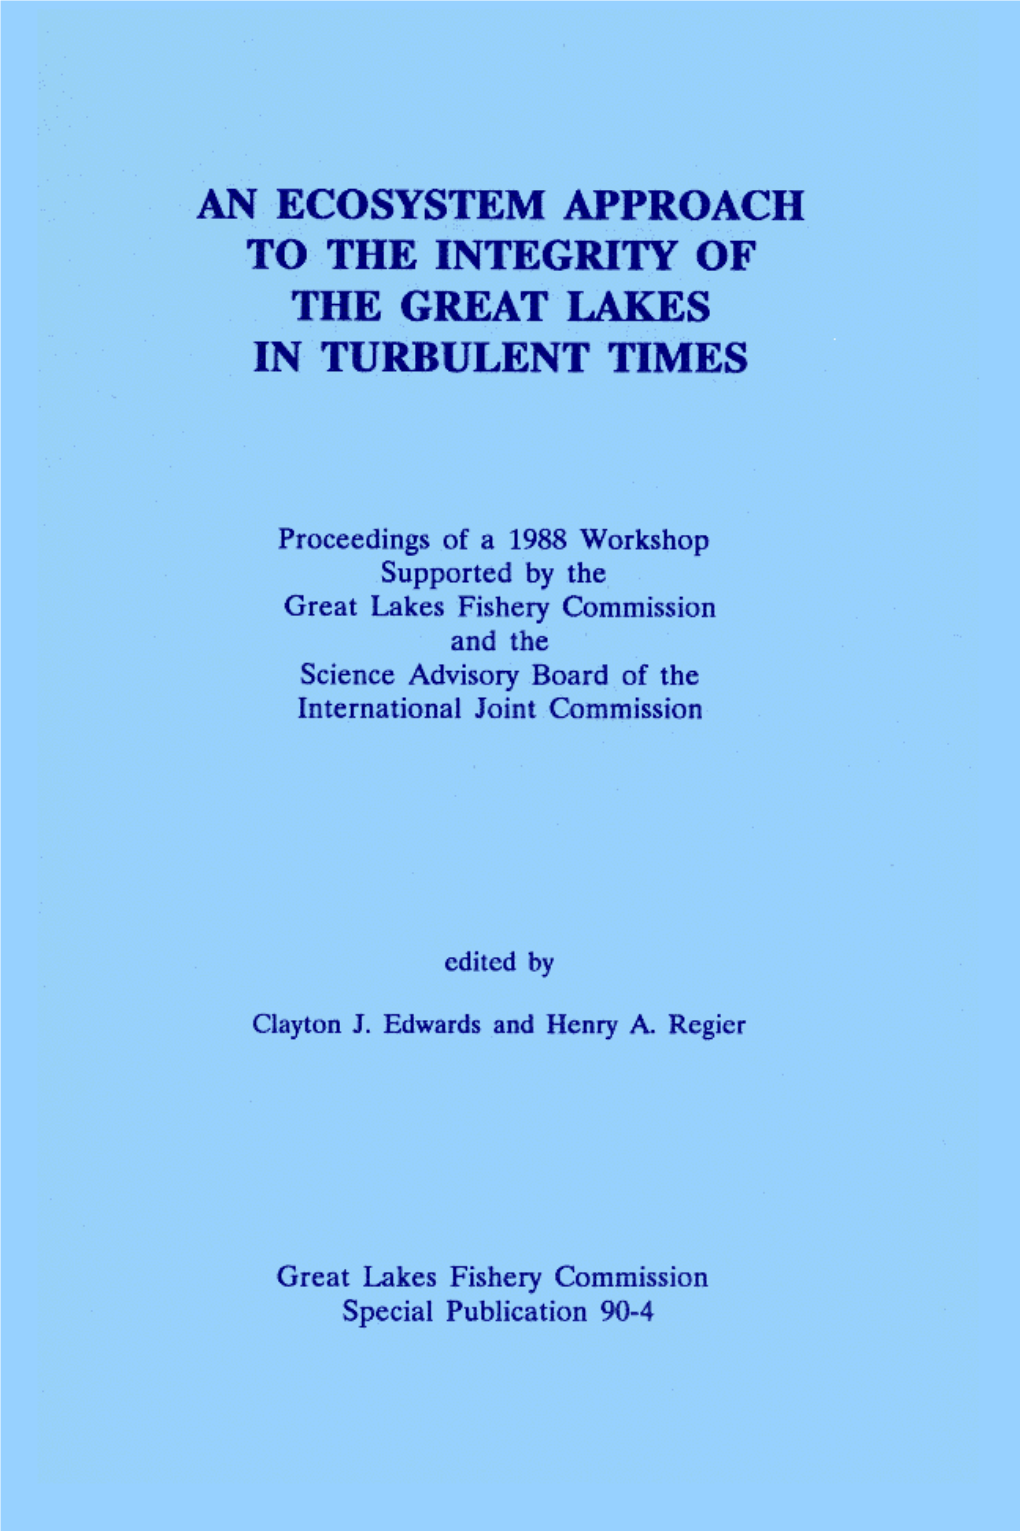 An Ecosystem Approach to the Integrity of the Great Lakes in Turbulent Times